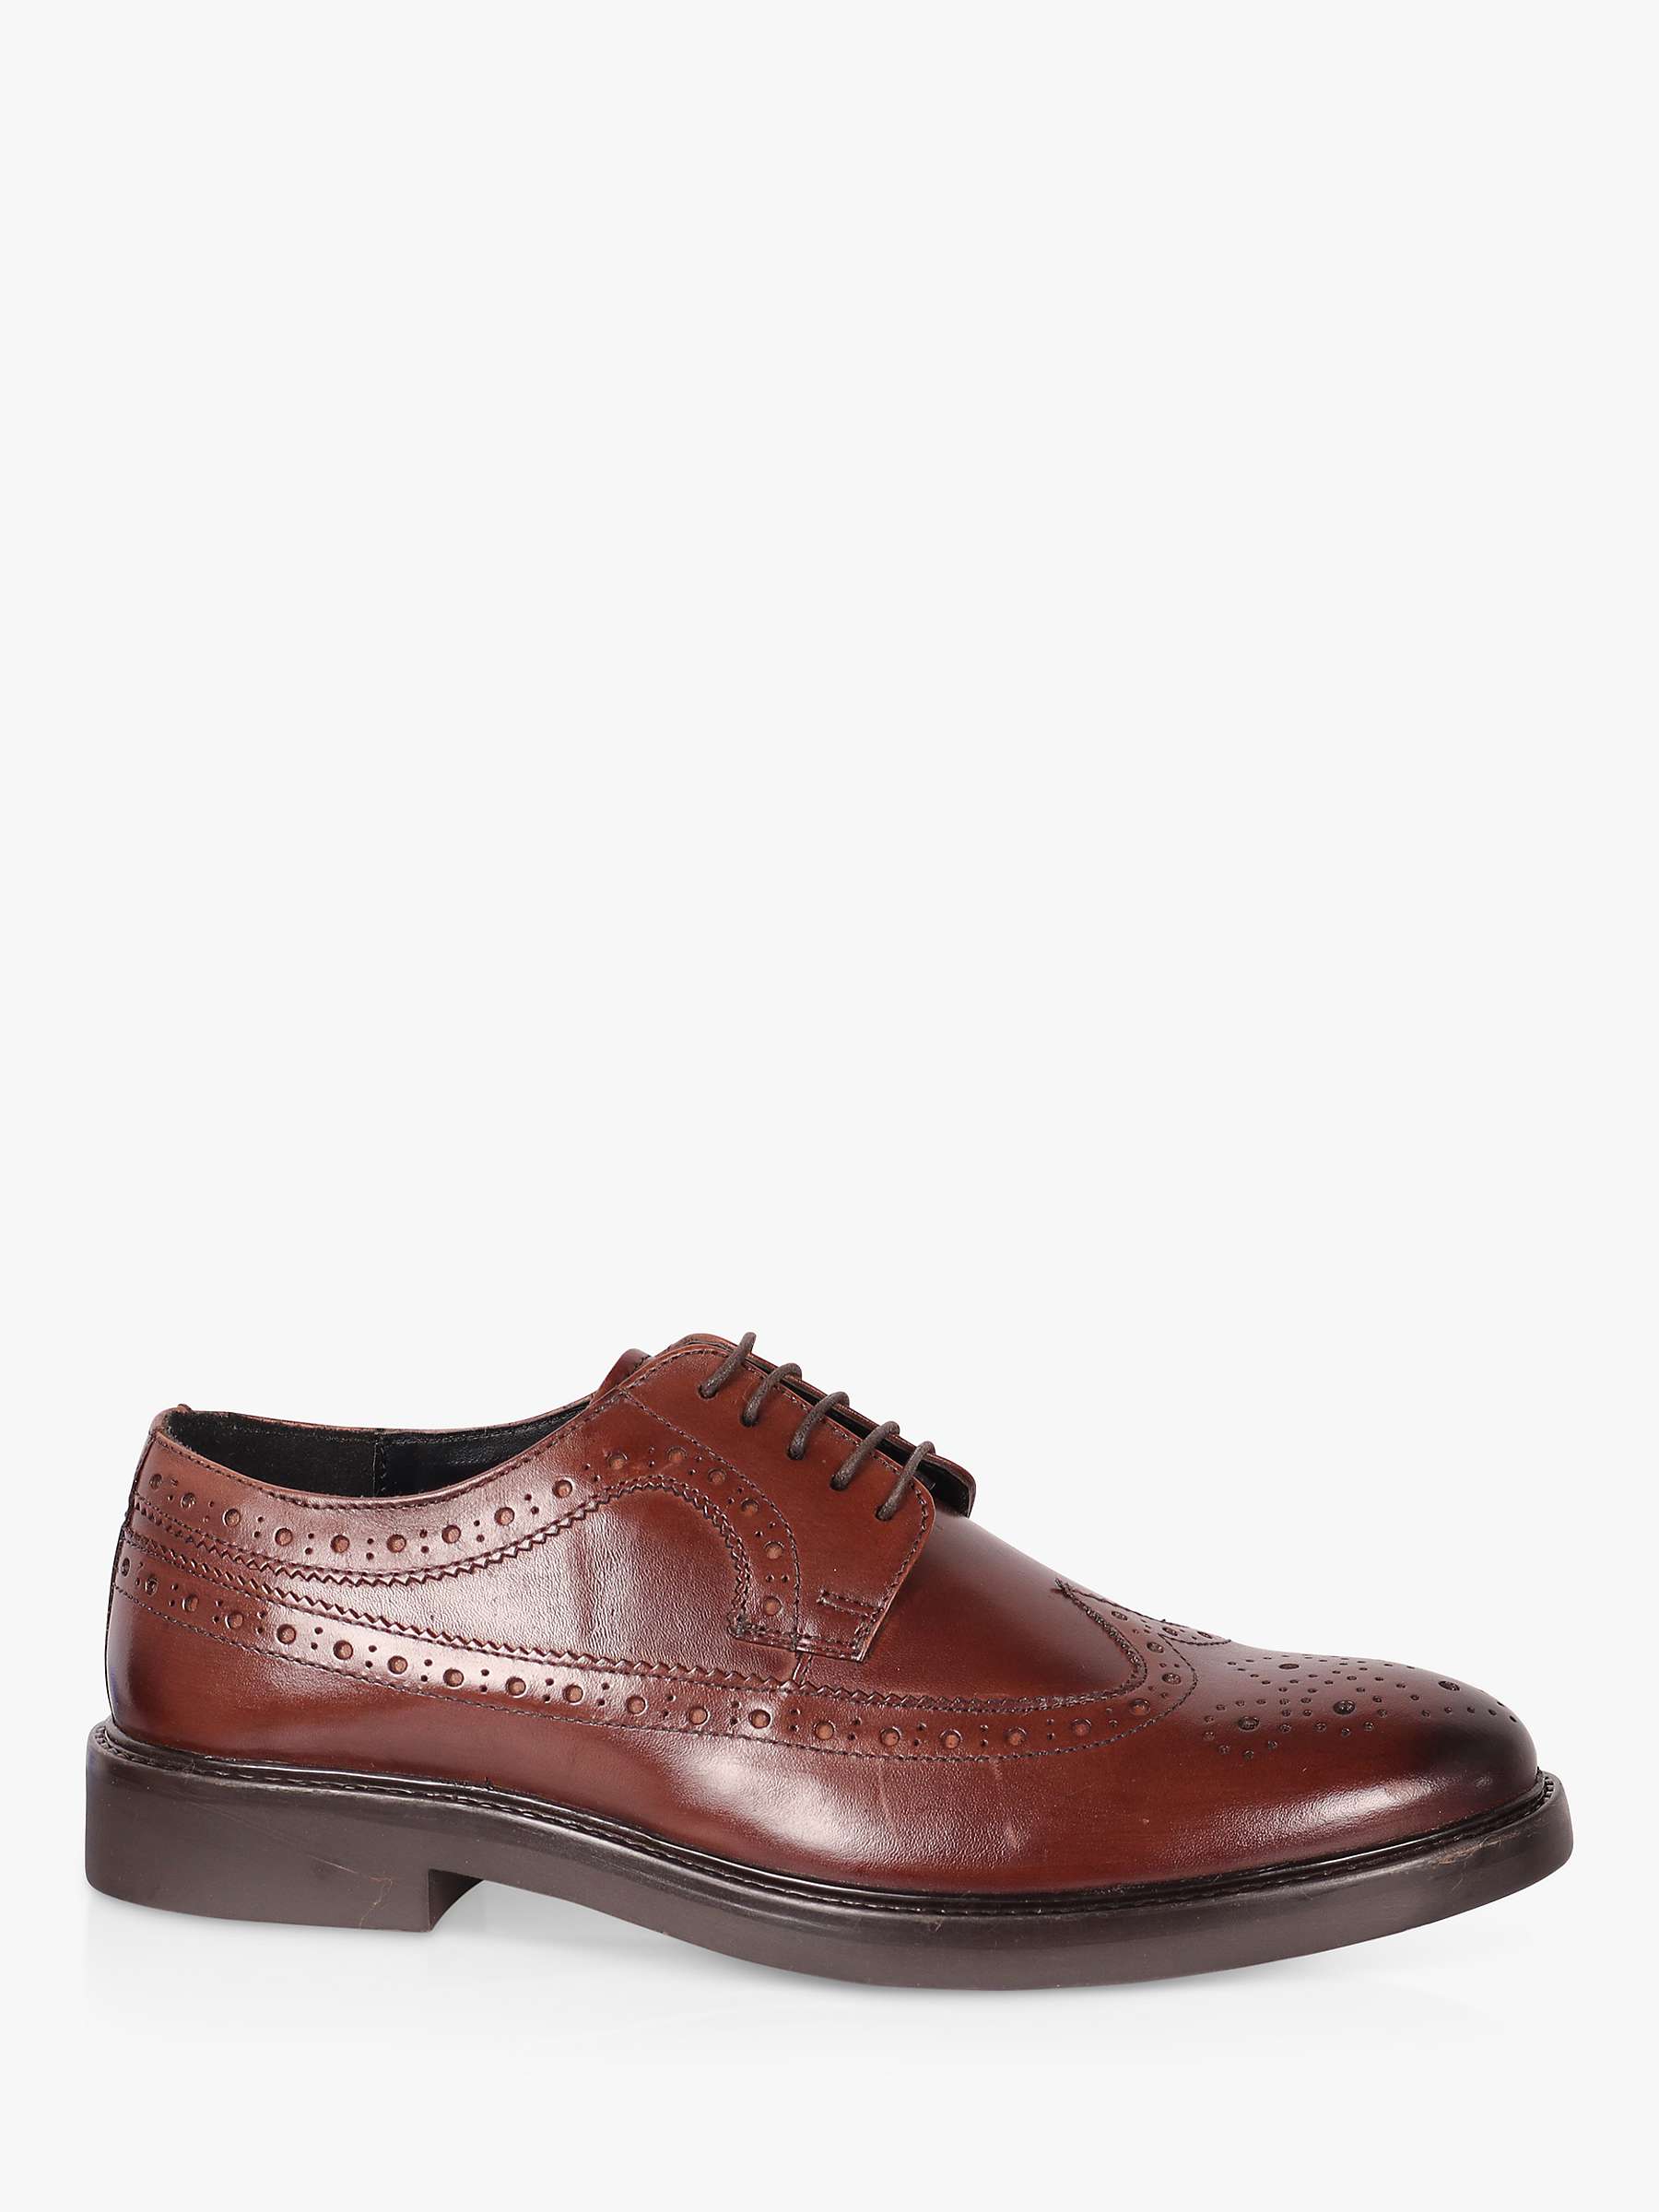 Buy Silver Street London Chigwell Leather Brogues Online at johnlewis.com